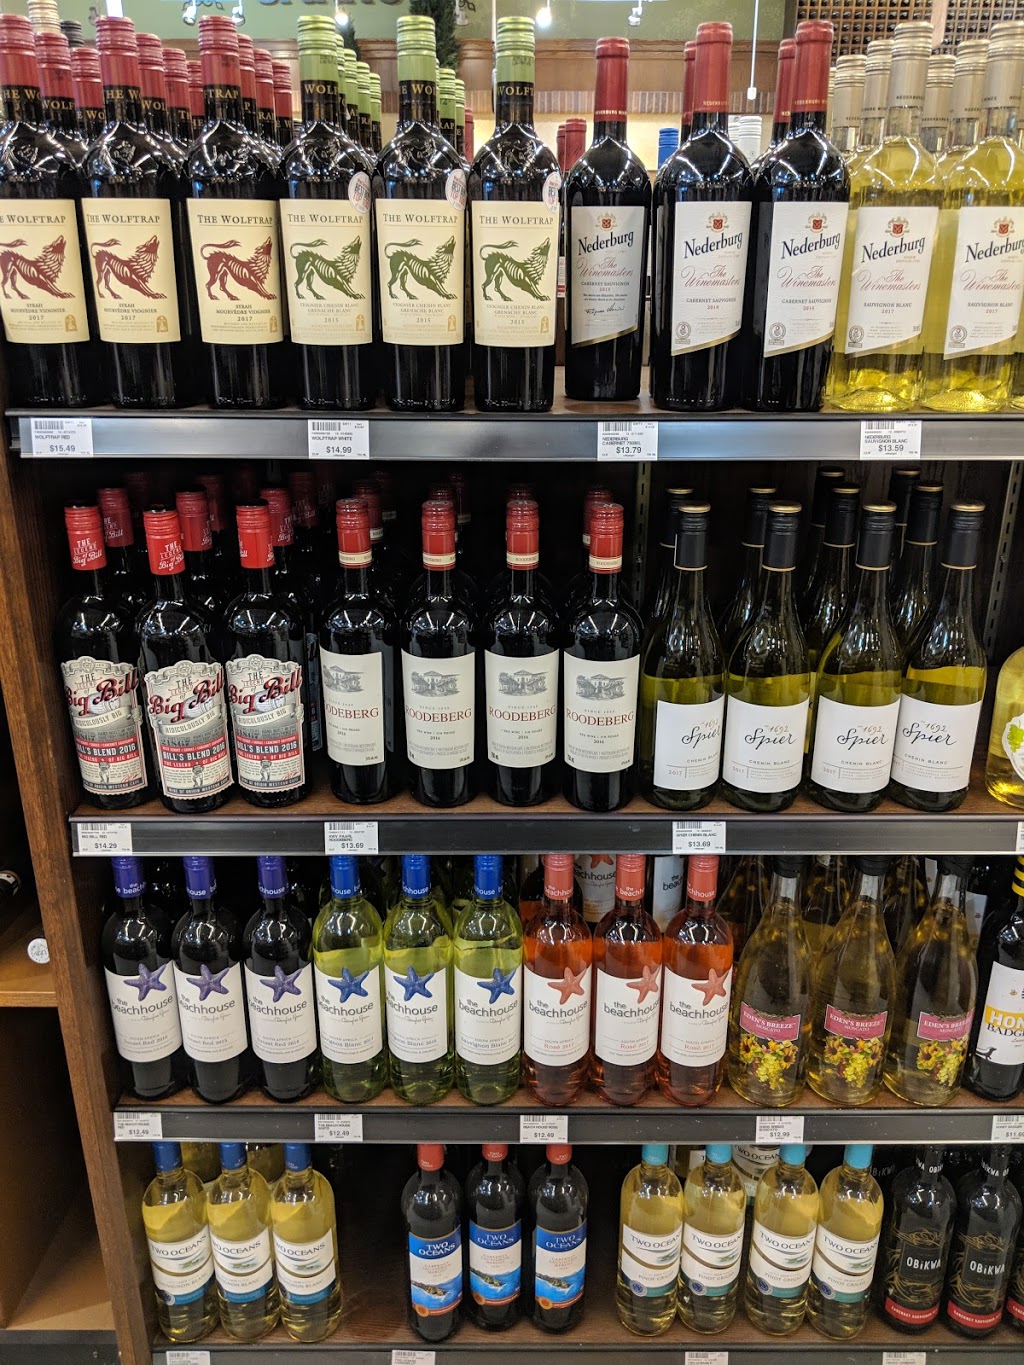 Co-op Wine Spirits Beer Shawnessy | 250 Shawville Blvd SE #80, Calgary, AB T2Y 2Z7, Canada | Phone: (403) 294-1966